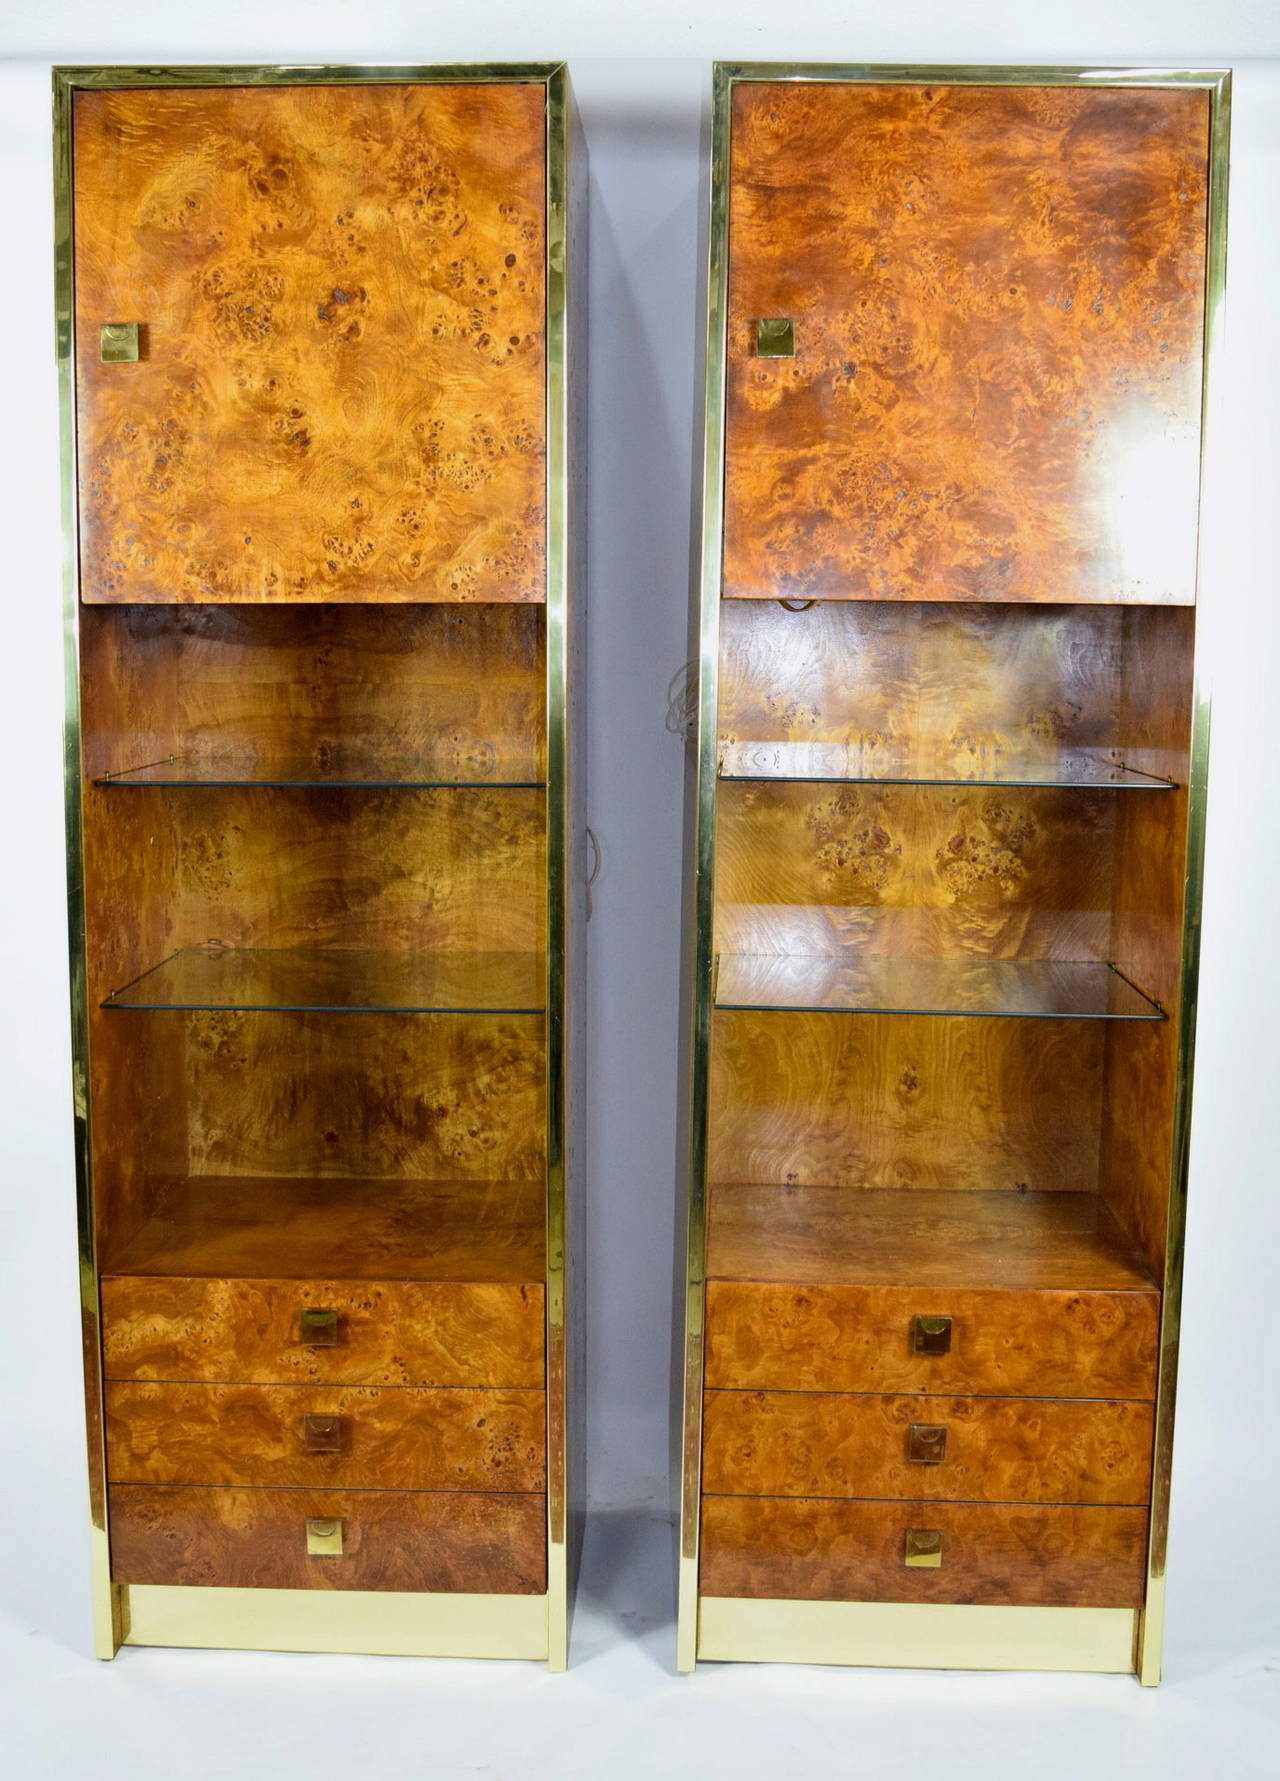 This is a gorgeous pair of Milo Baughman styled burled walnut shelf units by Founders (a division of Thomasville). They can be separate or displayed together as a single unit. There is plenty of storage, glass display shelving and drawers as well as